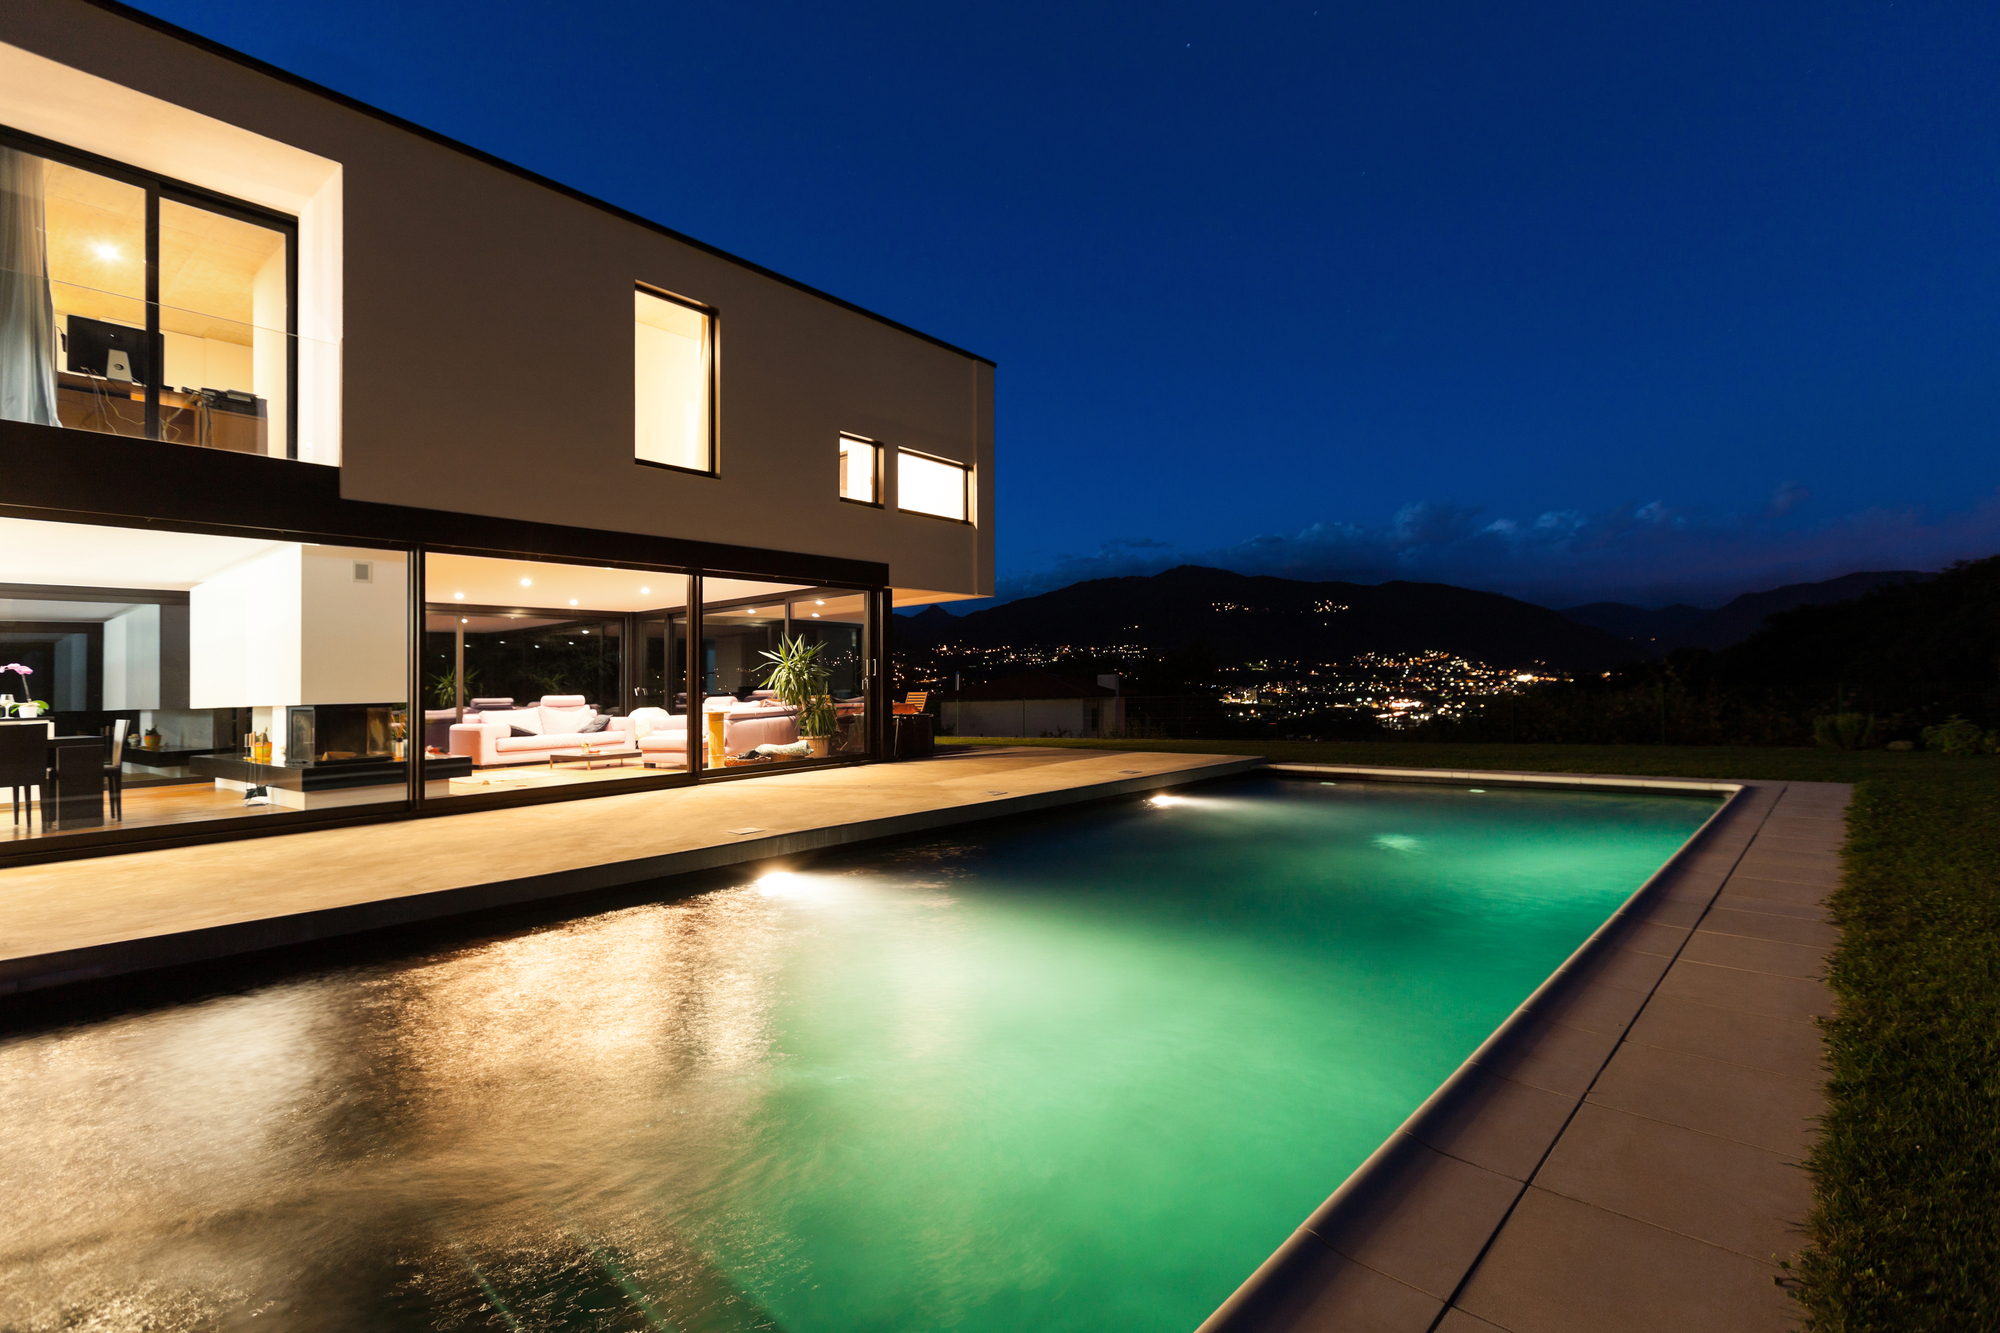 A house with a pool at night.